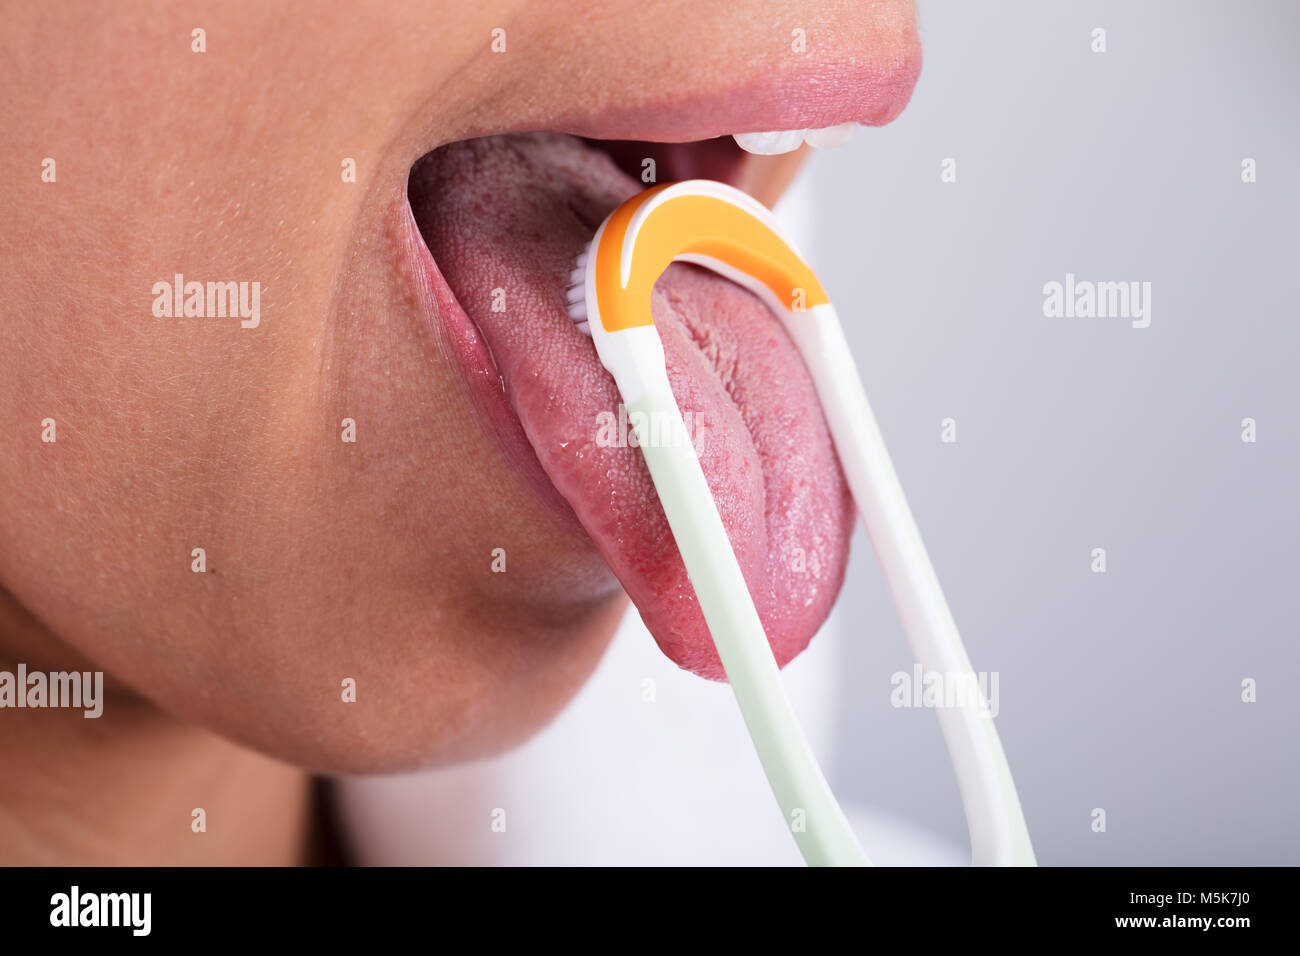 Photo Of Young Woman Cleaning Tongue With Cleaner Stock Photo